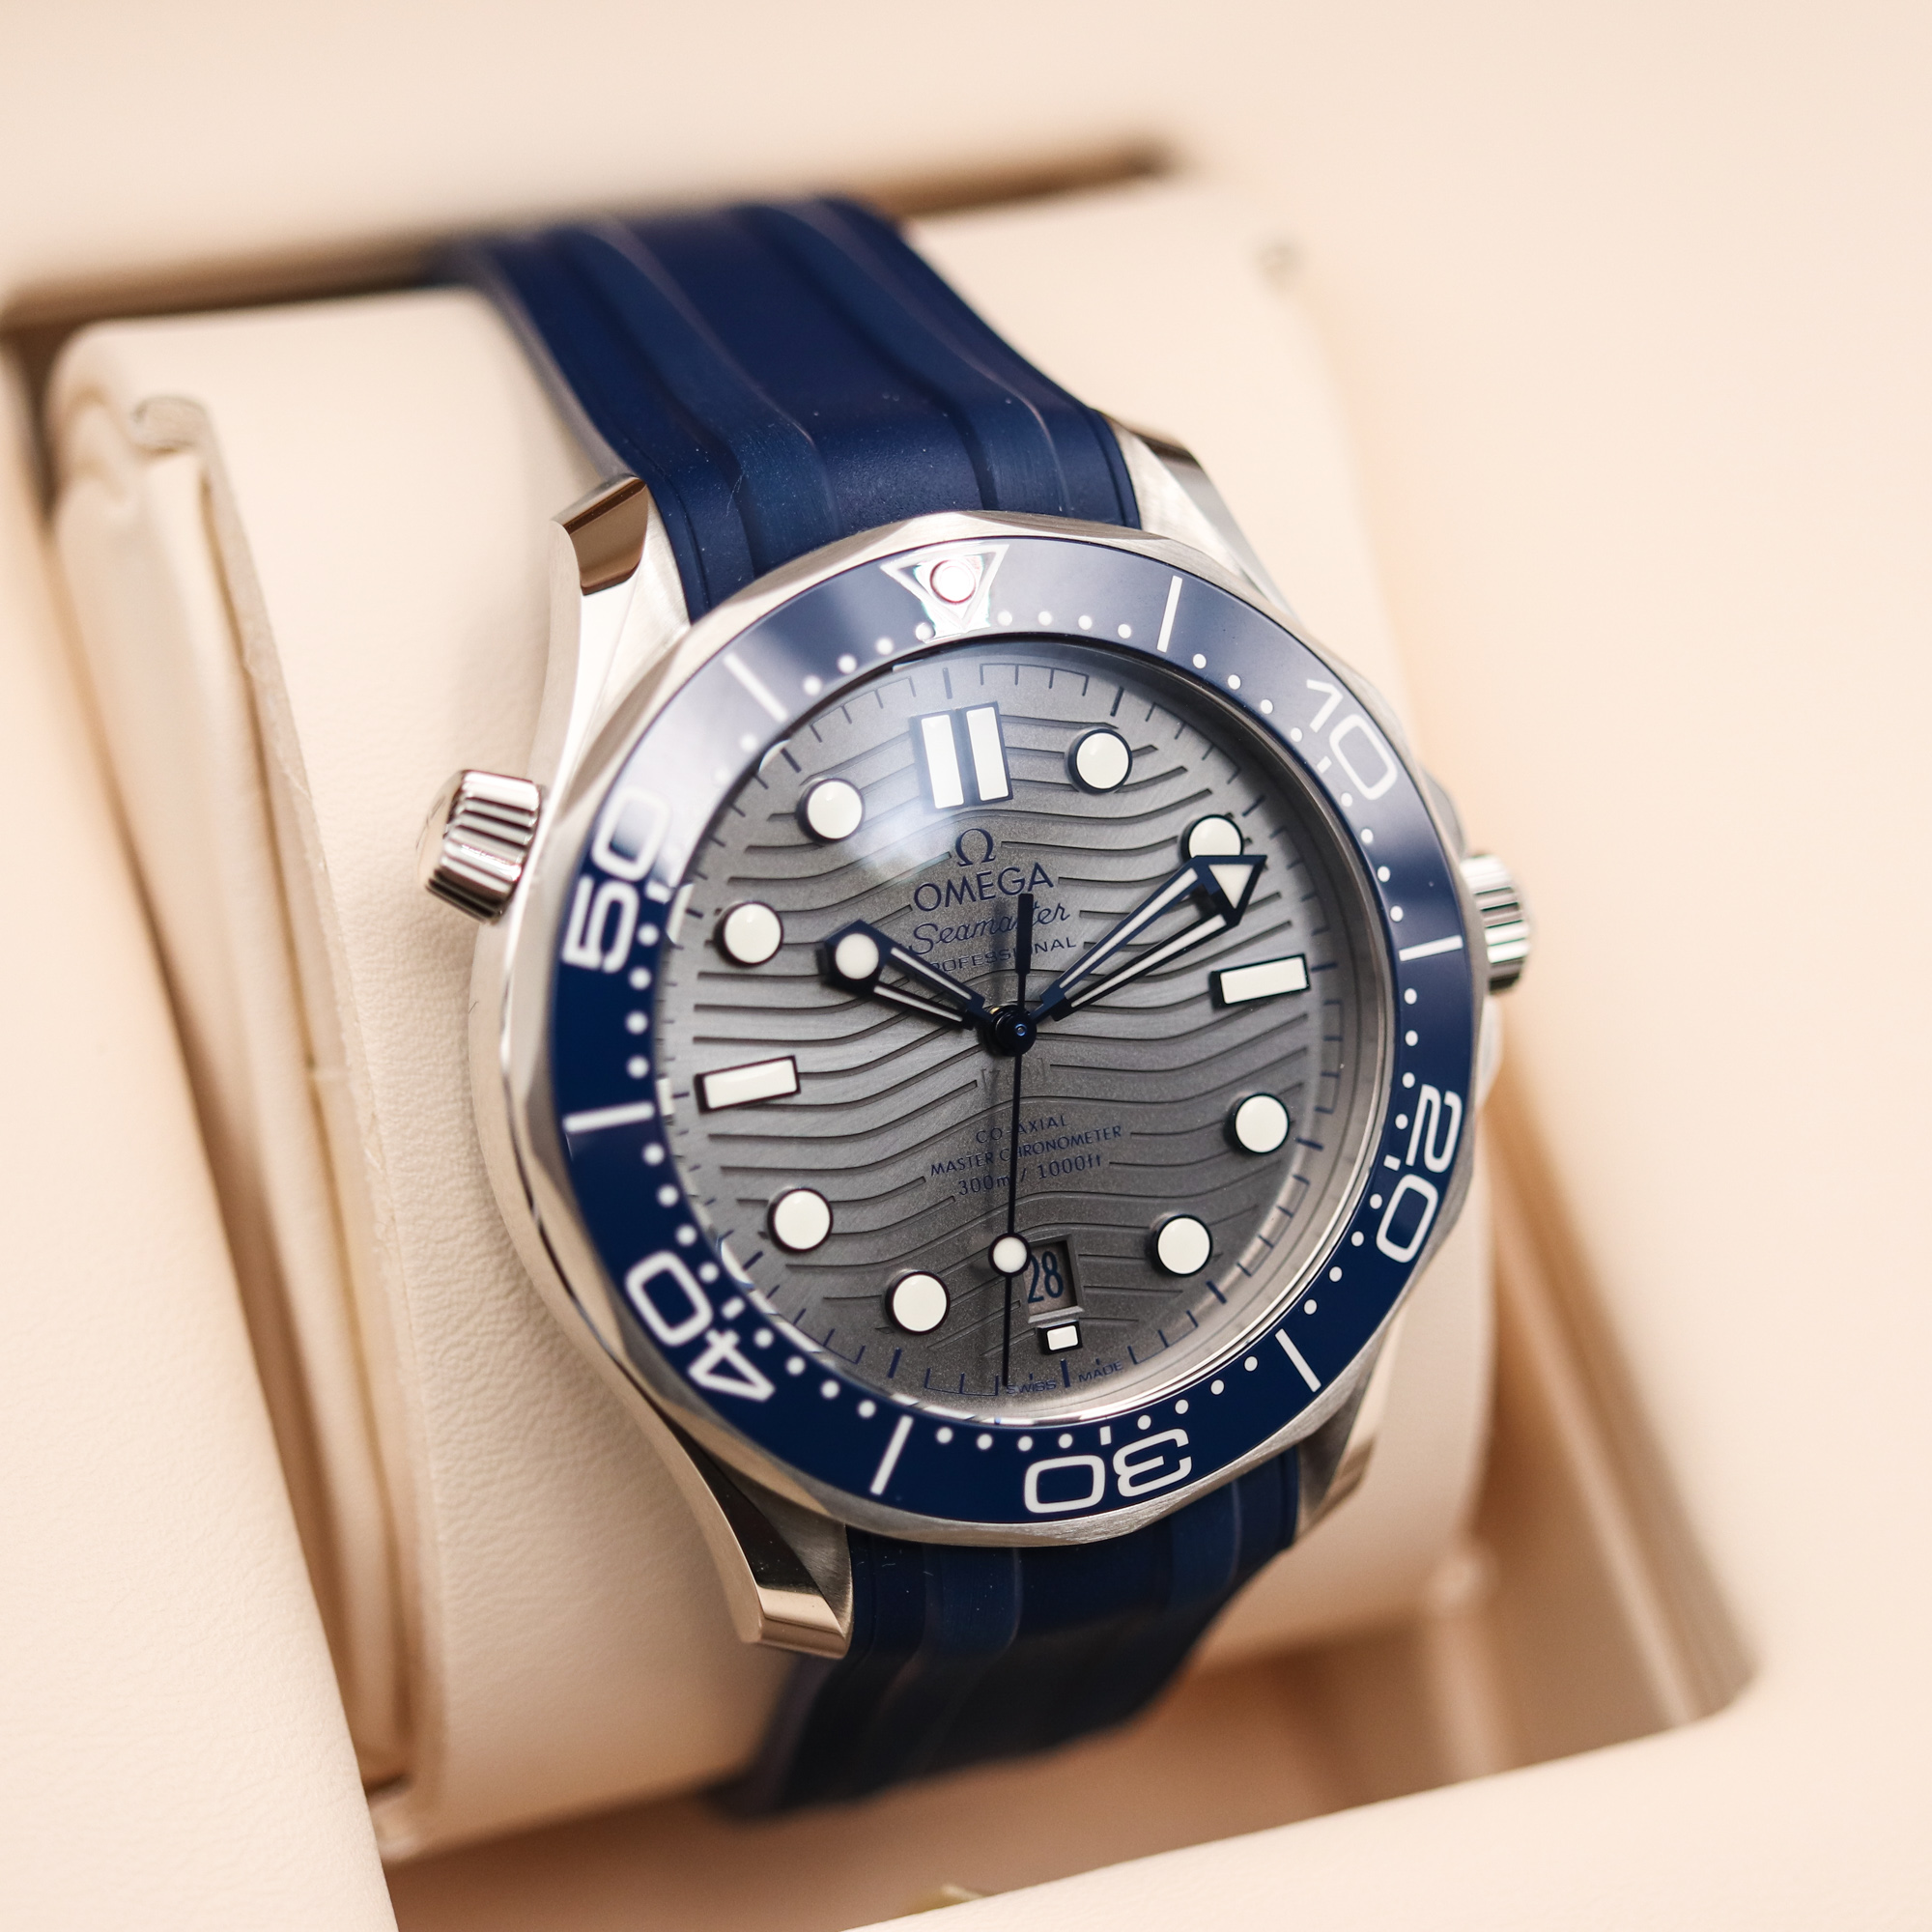 Seamaster Diver 300M Co-Axial Master Chronometer | Omega | 210.32